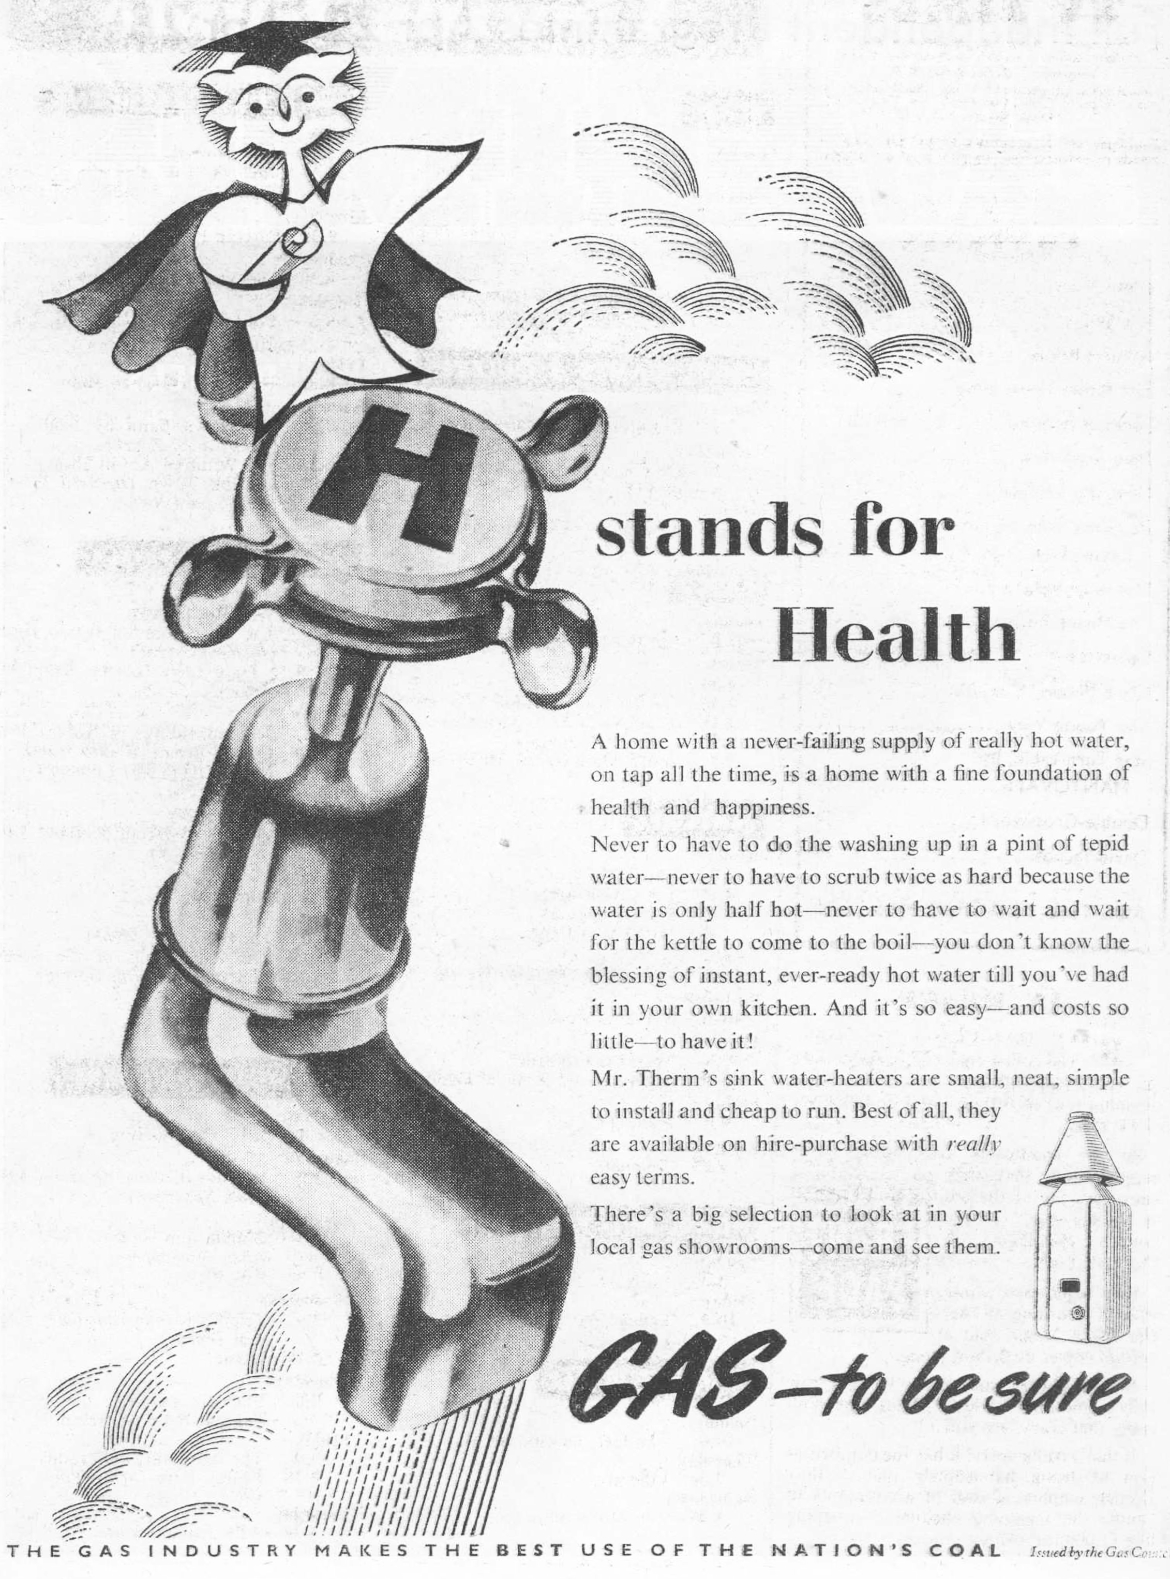 H stands for Health